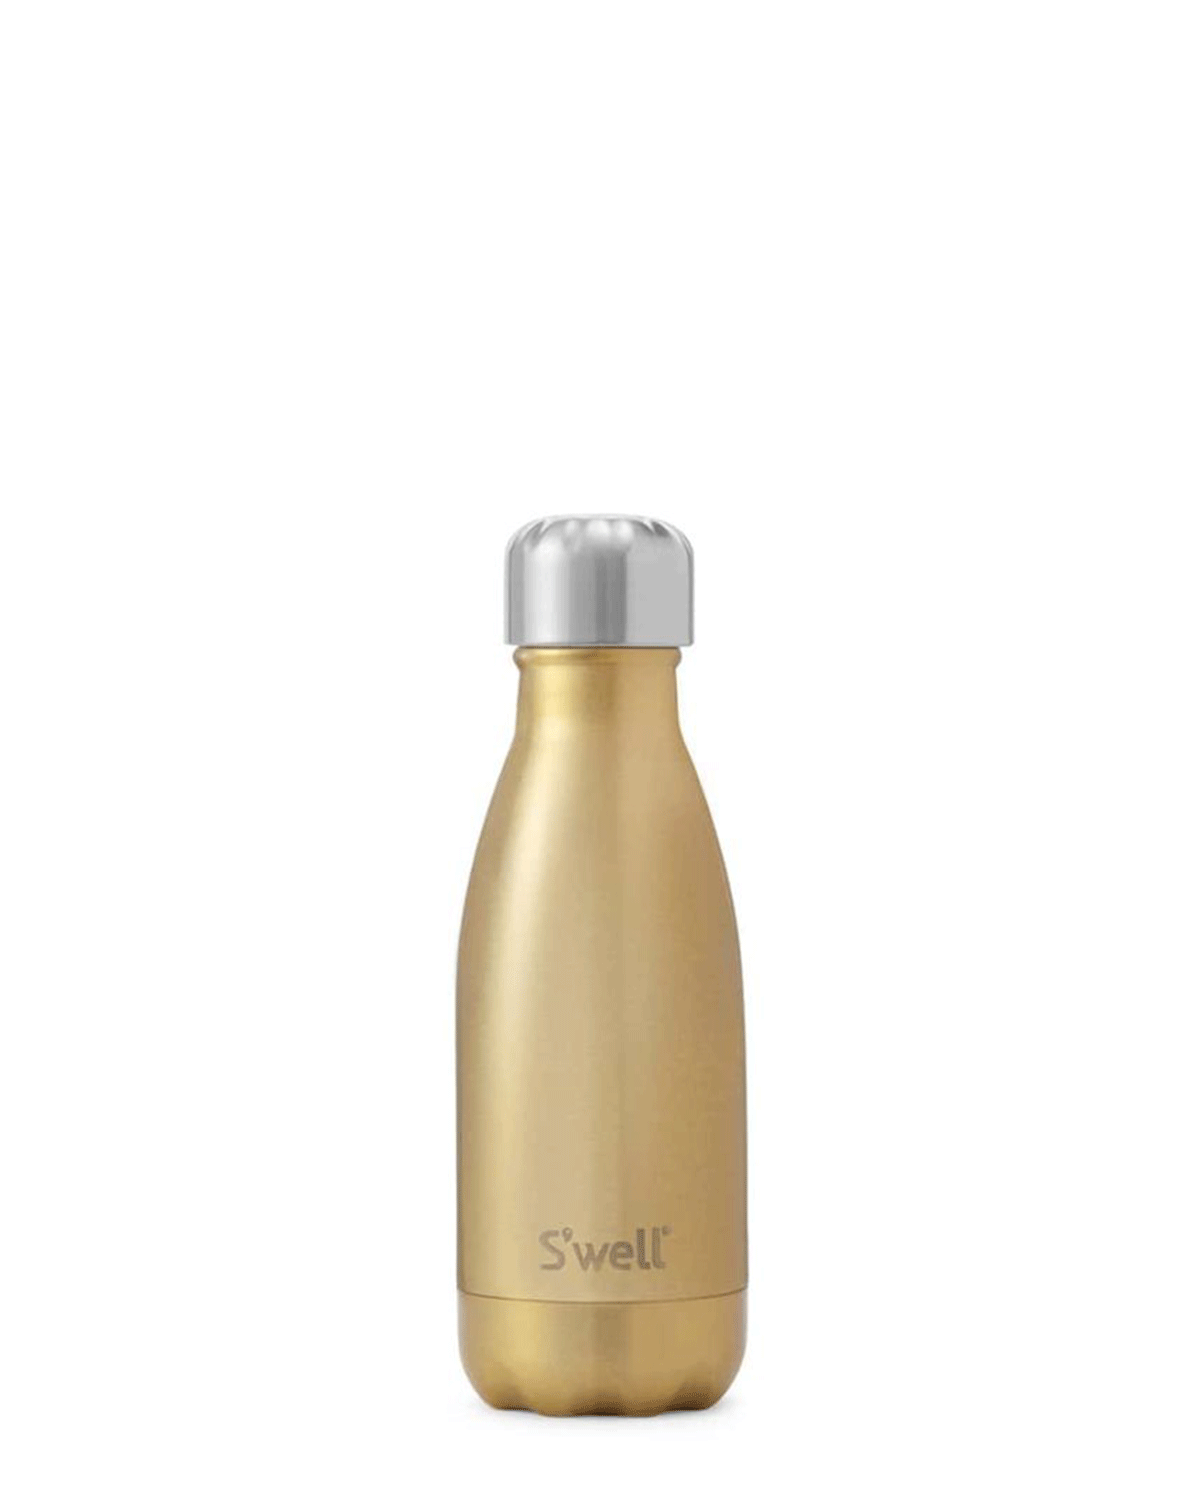 S'well Glitter Collection Bottle - 9 oz